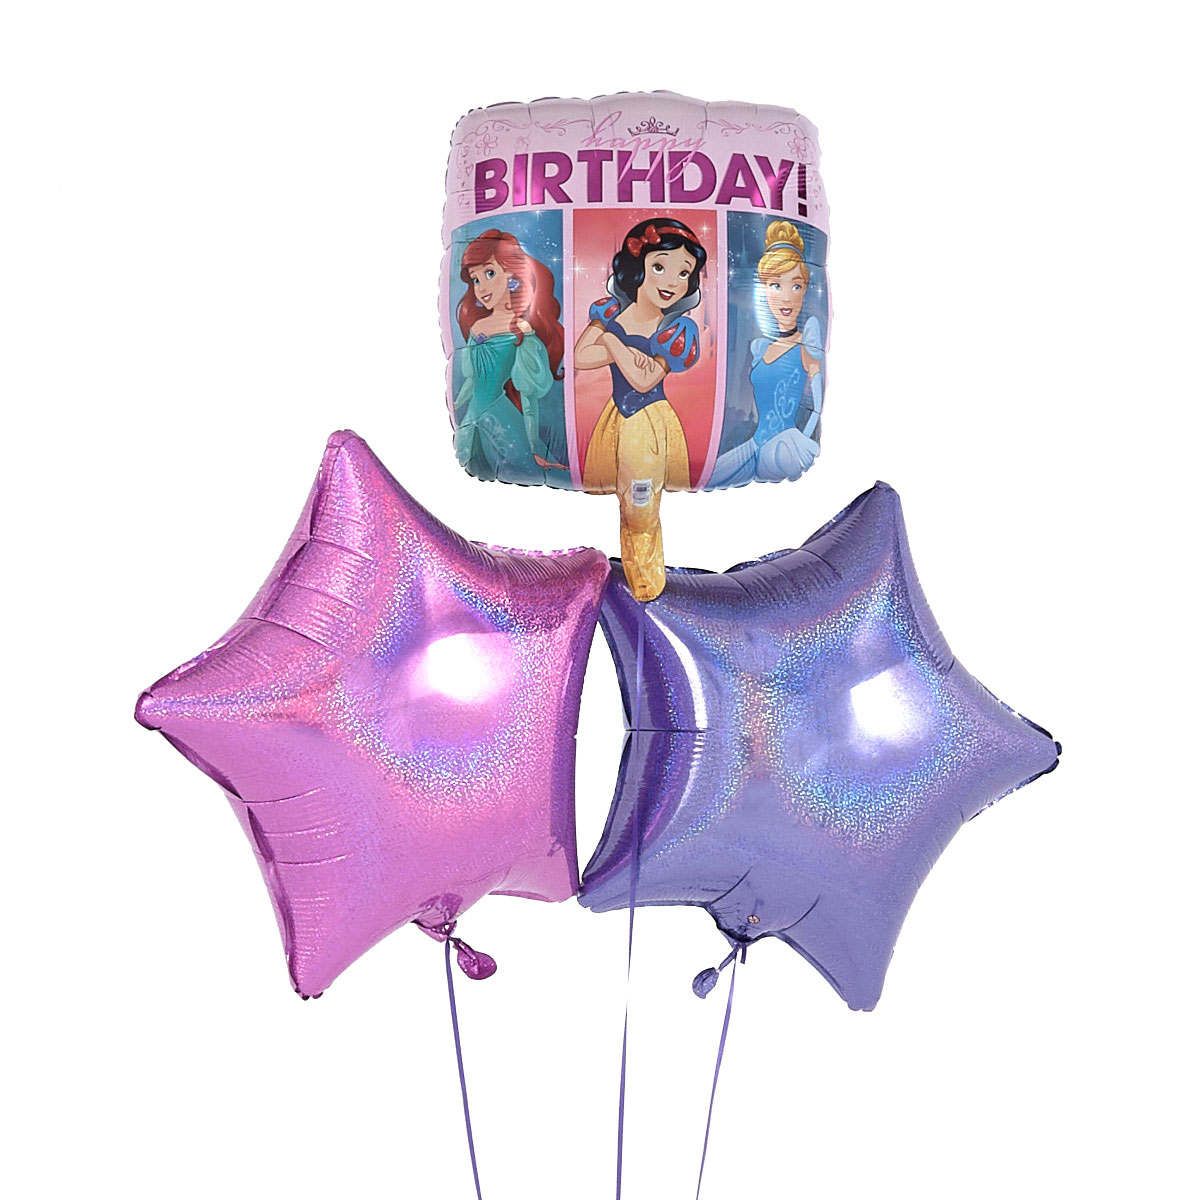 Disney Princess Pink Balloon Bouquet - DELIVERED INFLATED! 